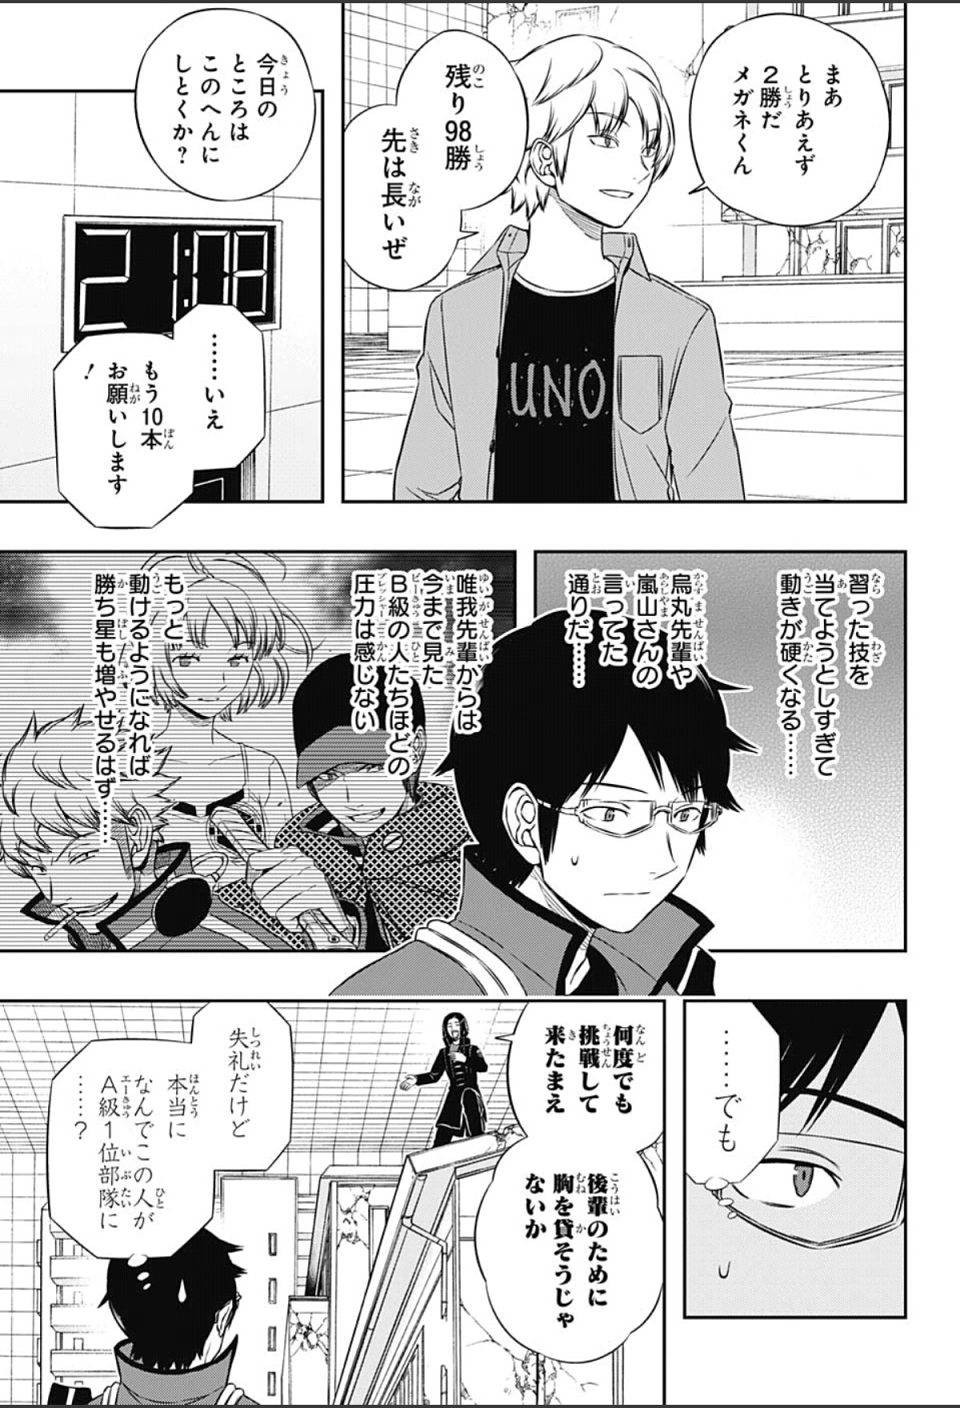 World Trigger - Chapter 110 - Page 3